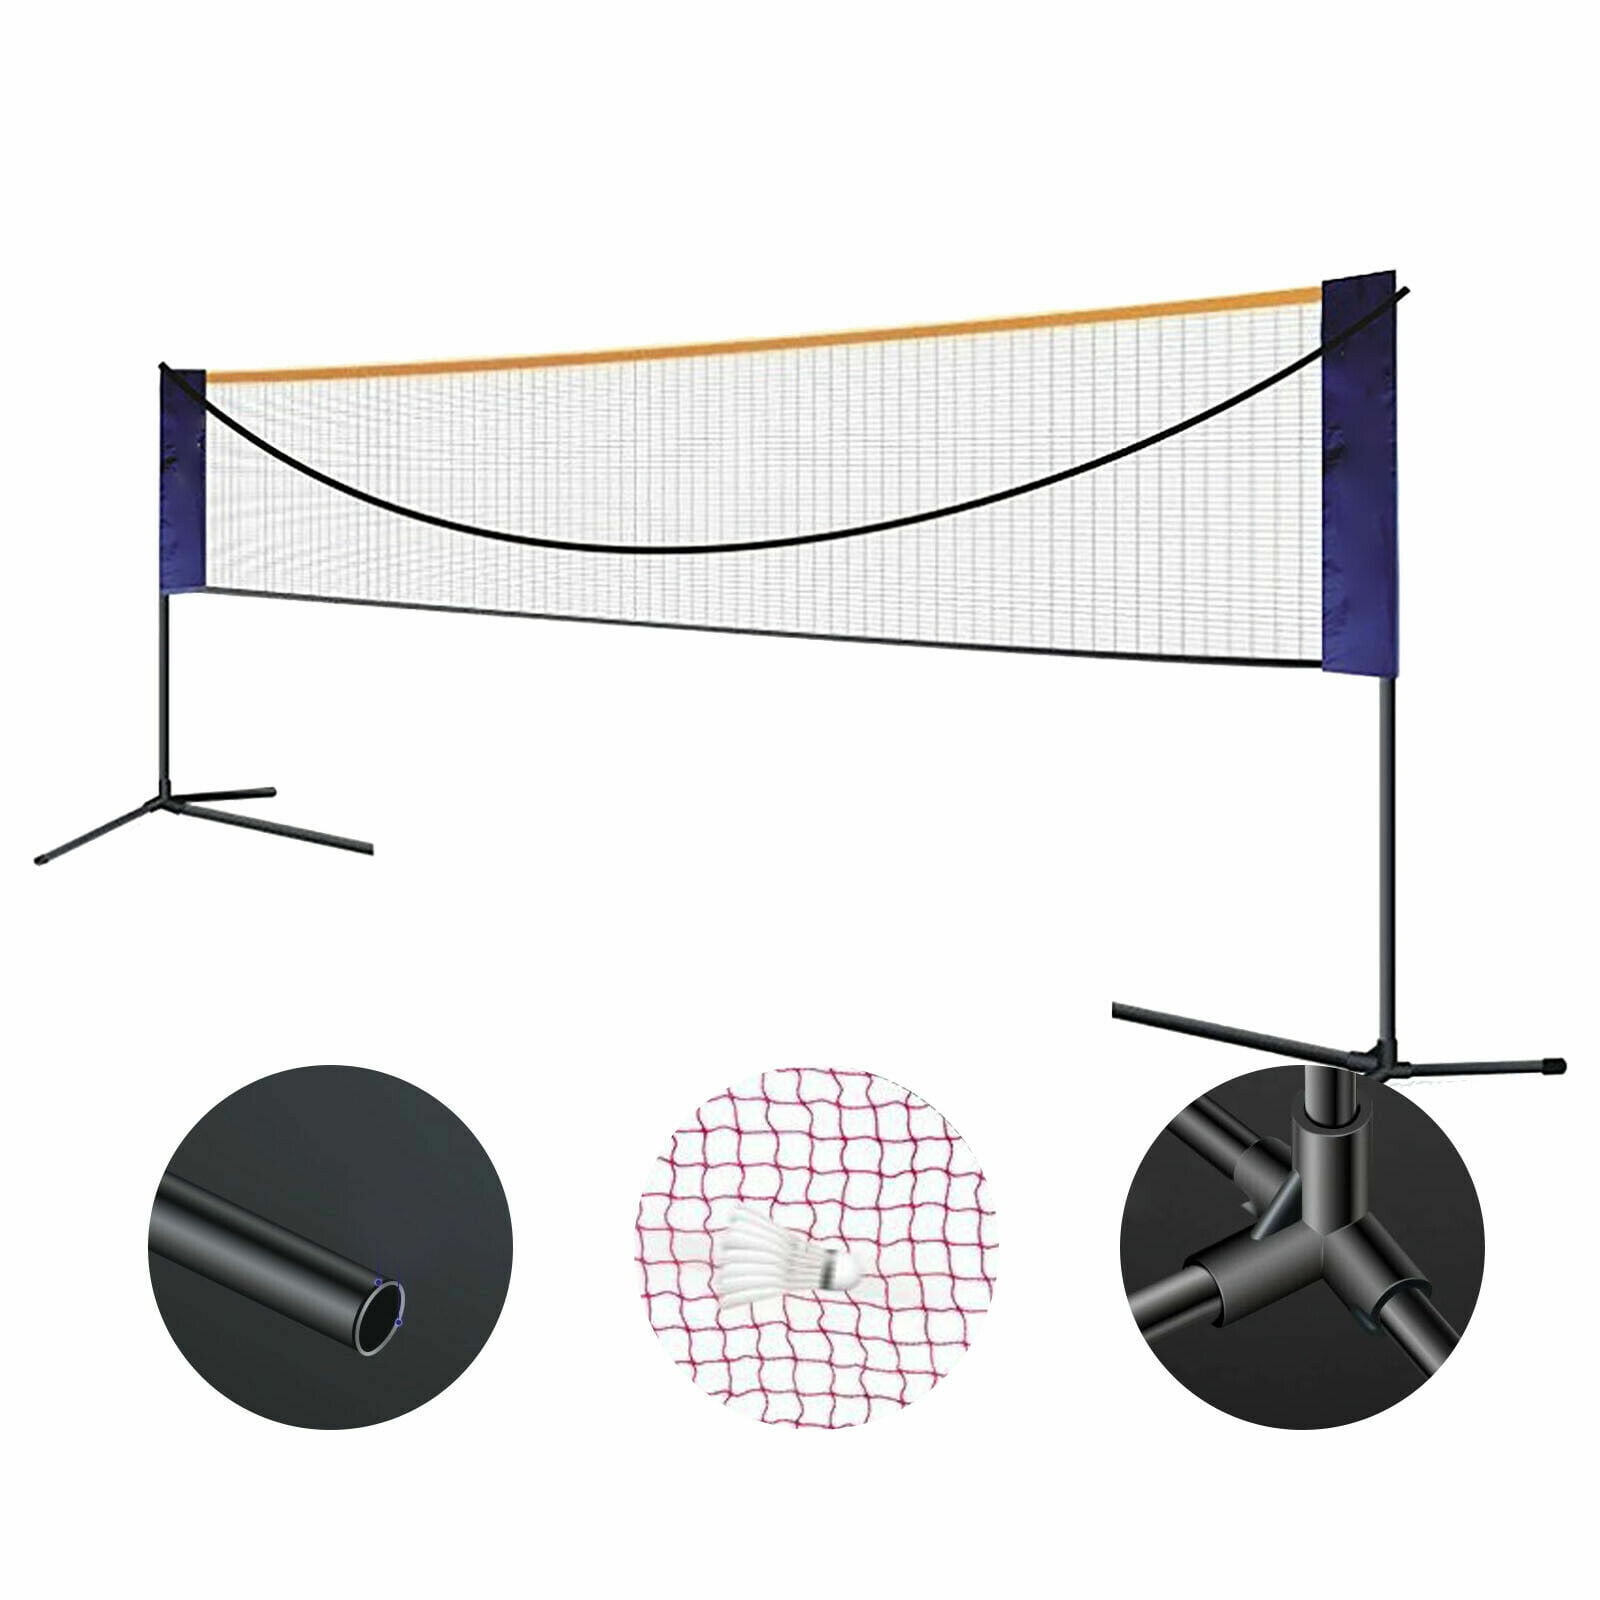 20 Feet Portable Badminton Volleyball Tennis Net Set with Folding Storage Bracket Carry Bag Strong Durable Height Width Adjustable